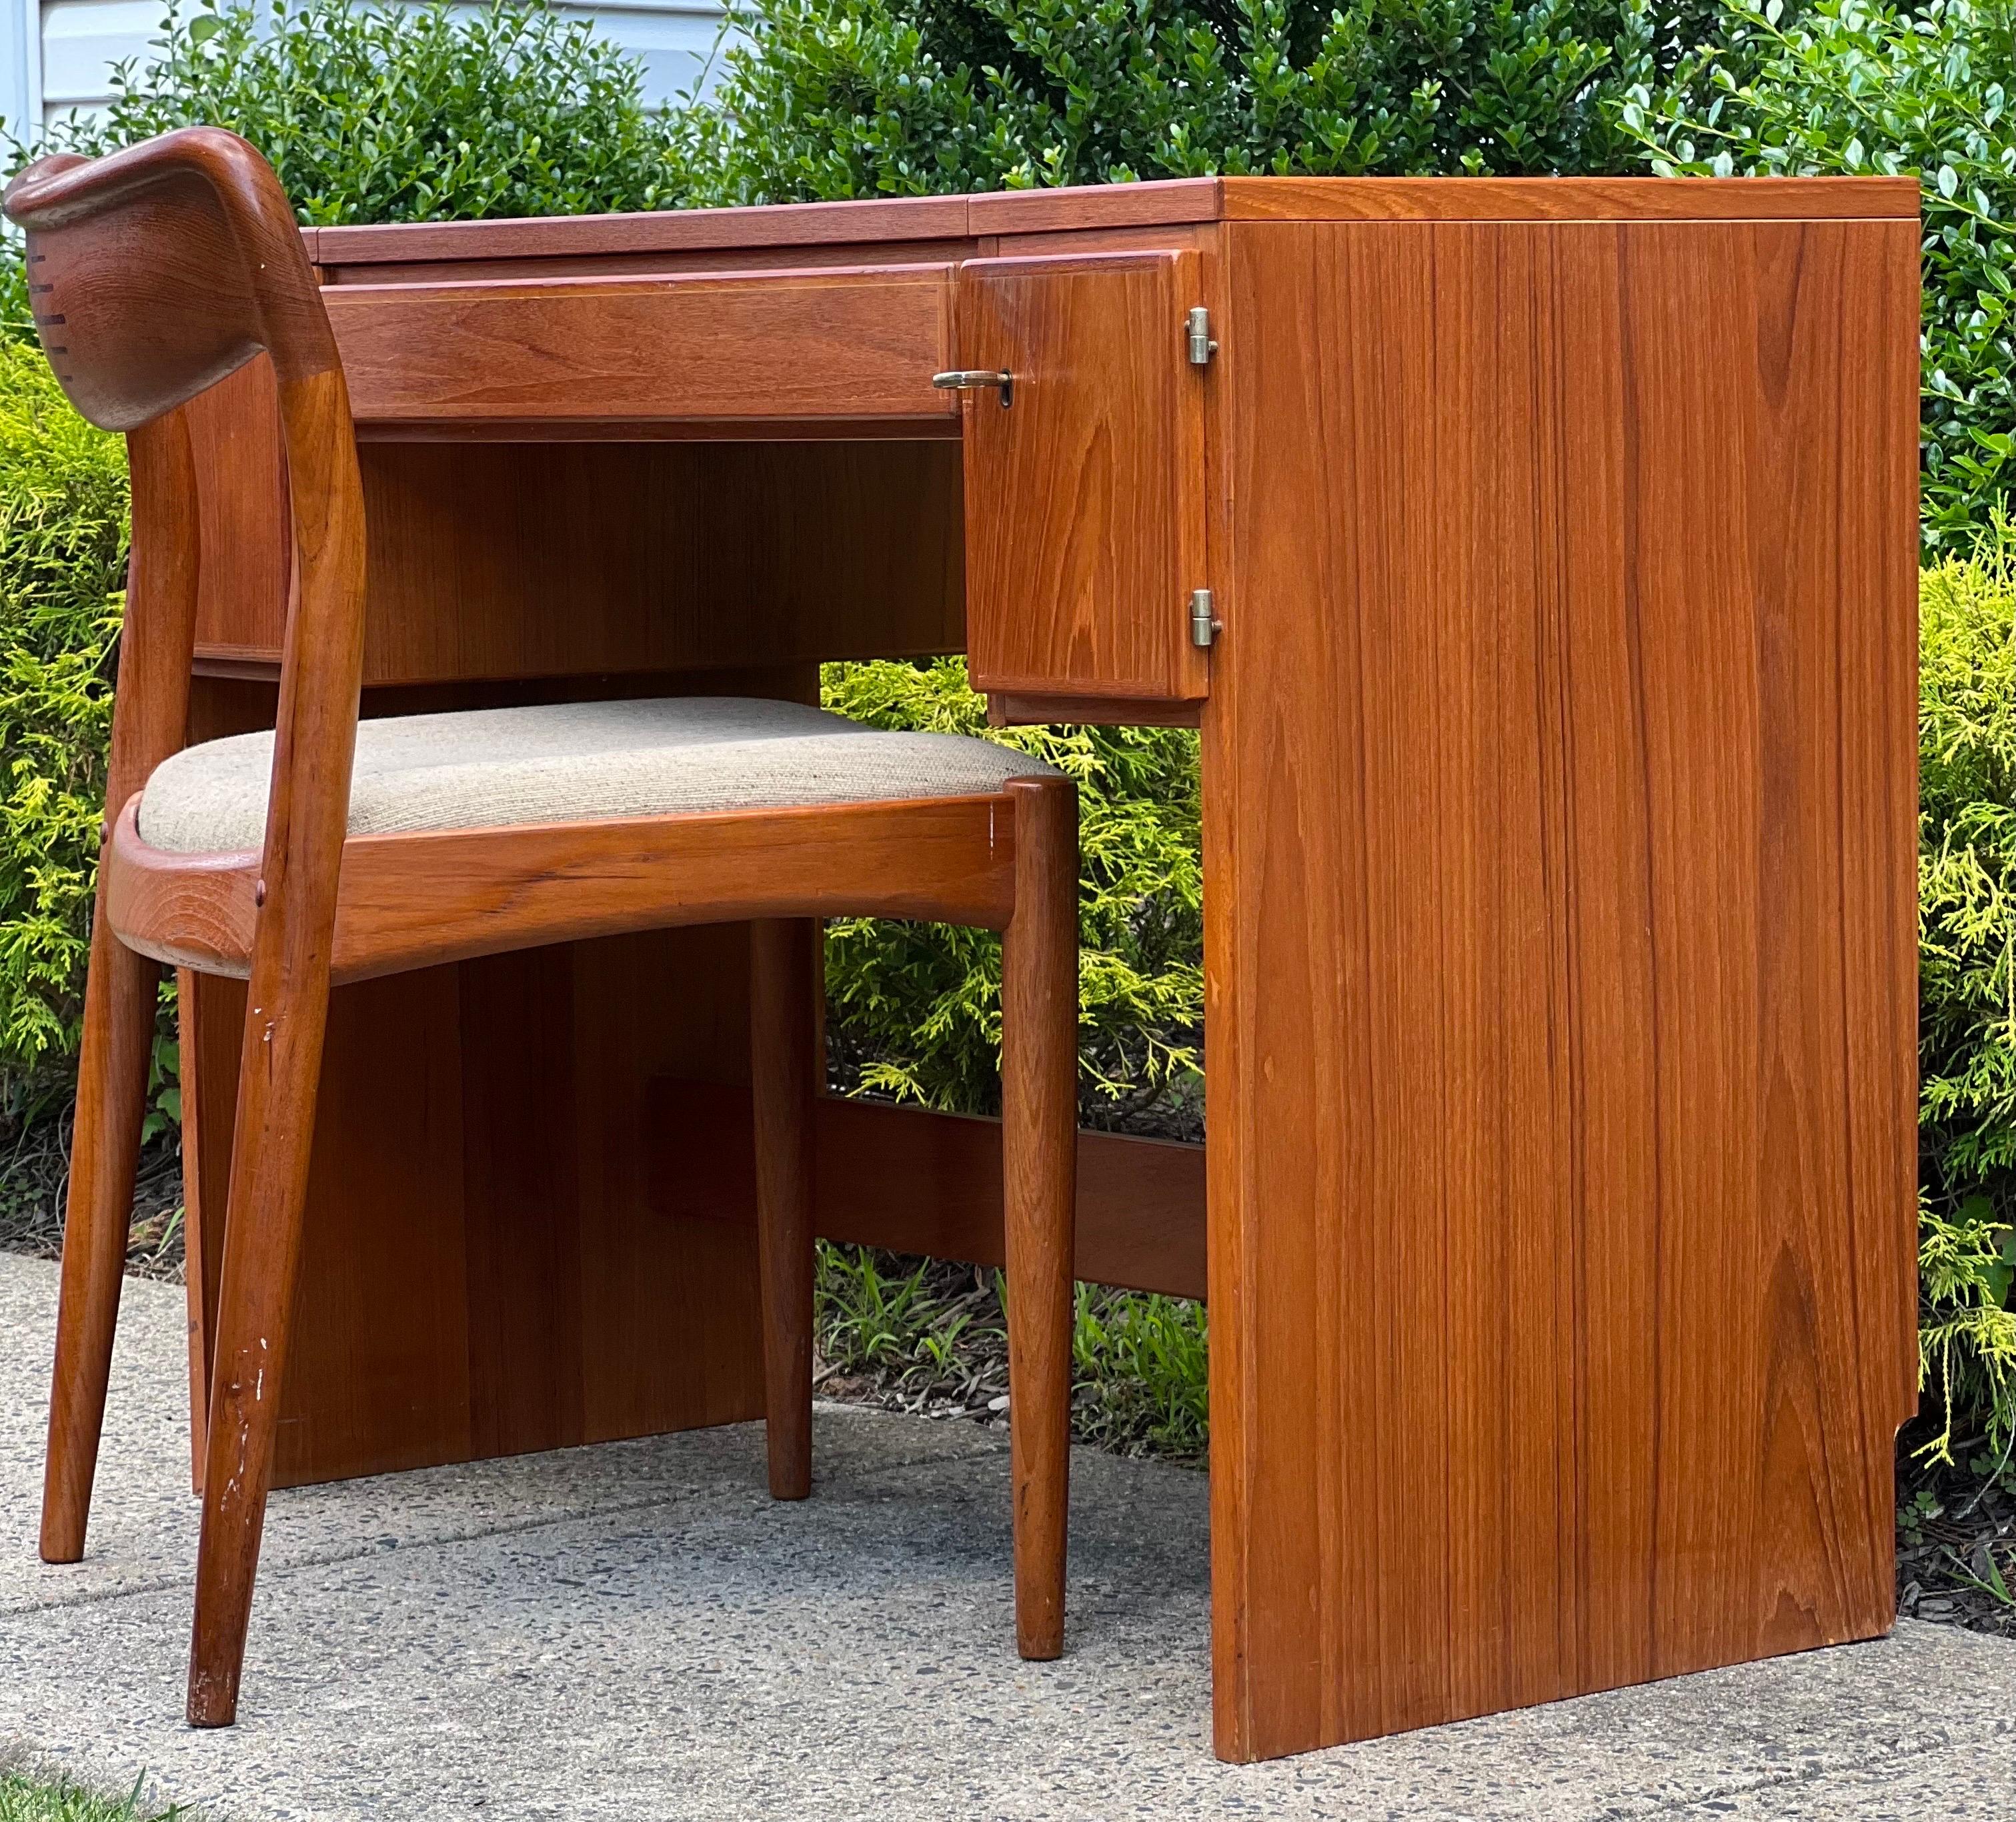 Fabulous 1960's Danish teak vanity with flip open top and coordinating upholstered chair by Uldum Mobelfabrik, made in Denmark.

Beautifully crafted, this vanity offers three intelligently designed sections and features a flip open top with a high